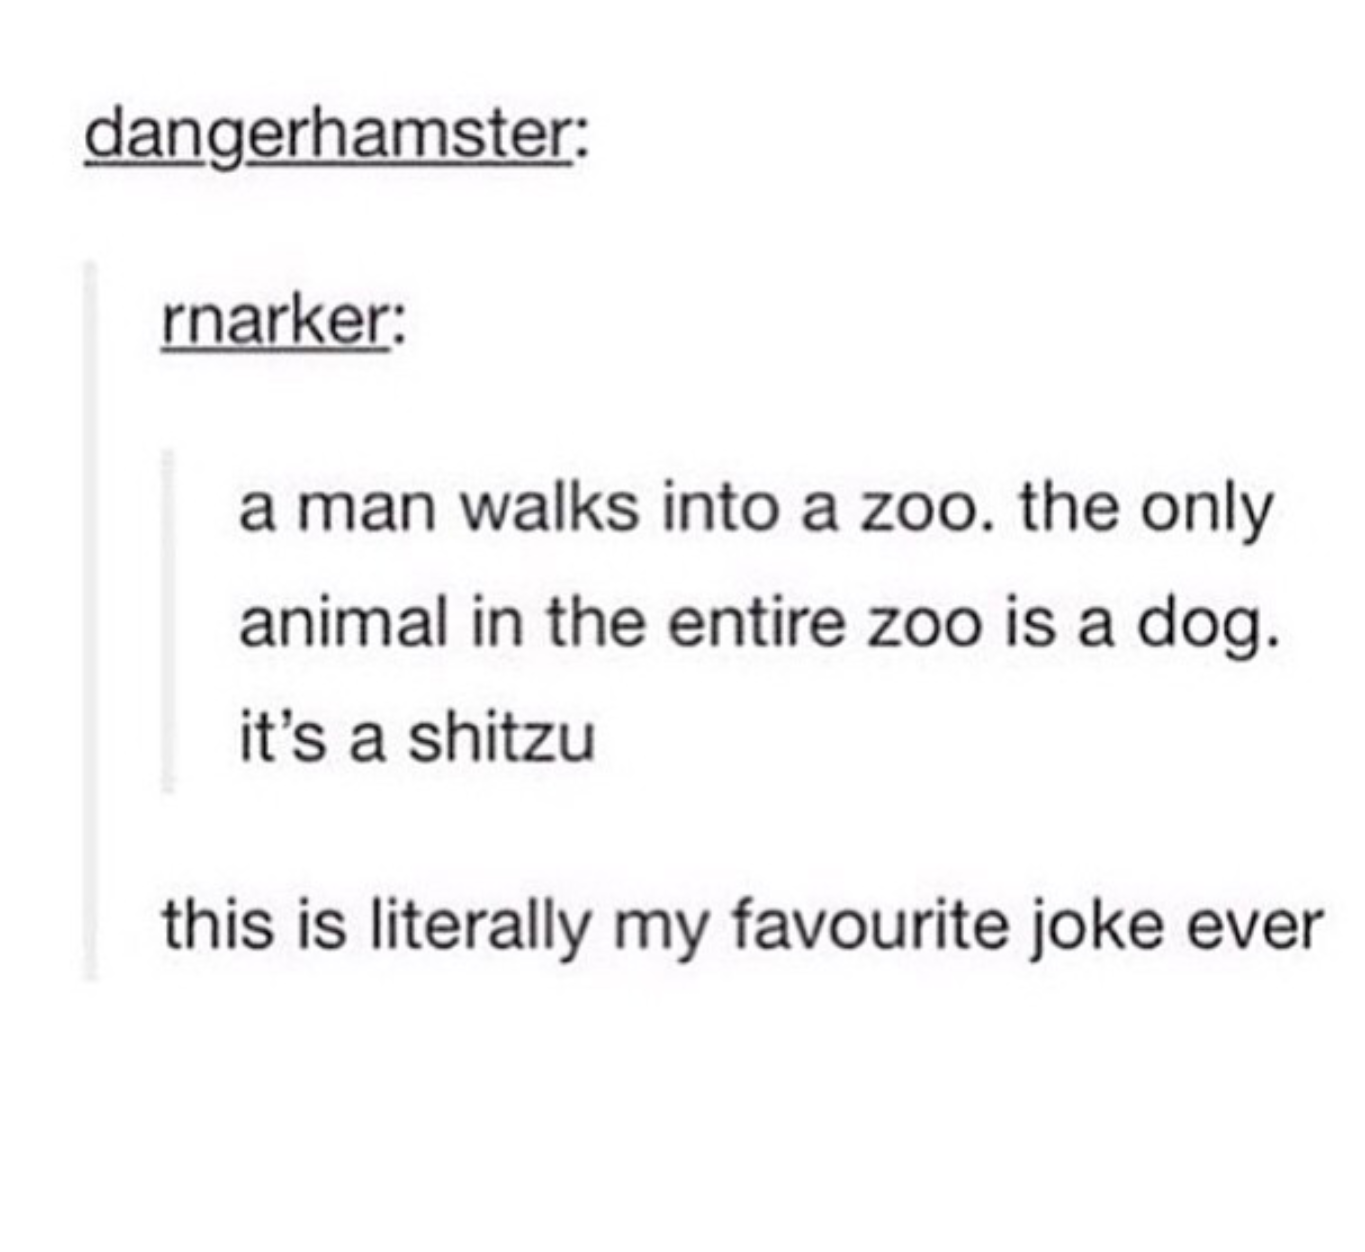 tumblr - iphone texts - dangerhamster rnarker a man walks into a zoo. the only animal in the entire zoo is a dog. it's a shitzu this is literally my favourite joke ever